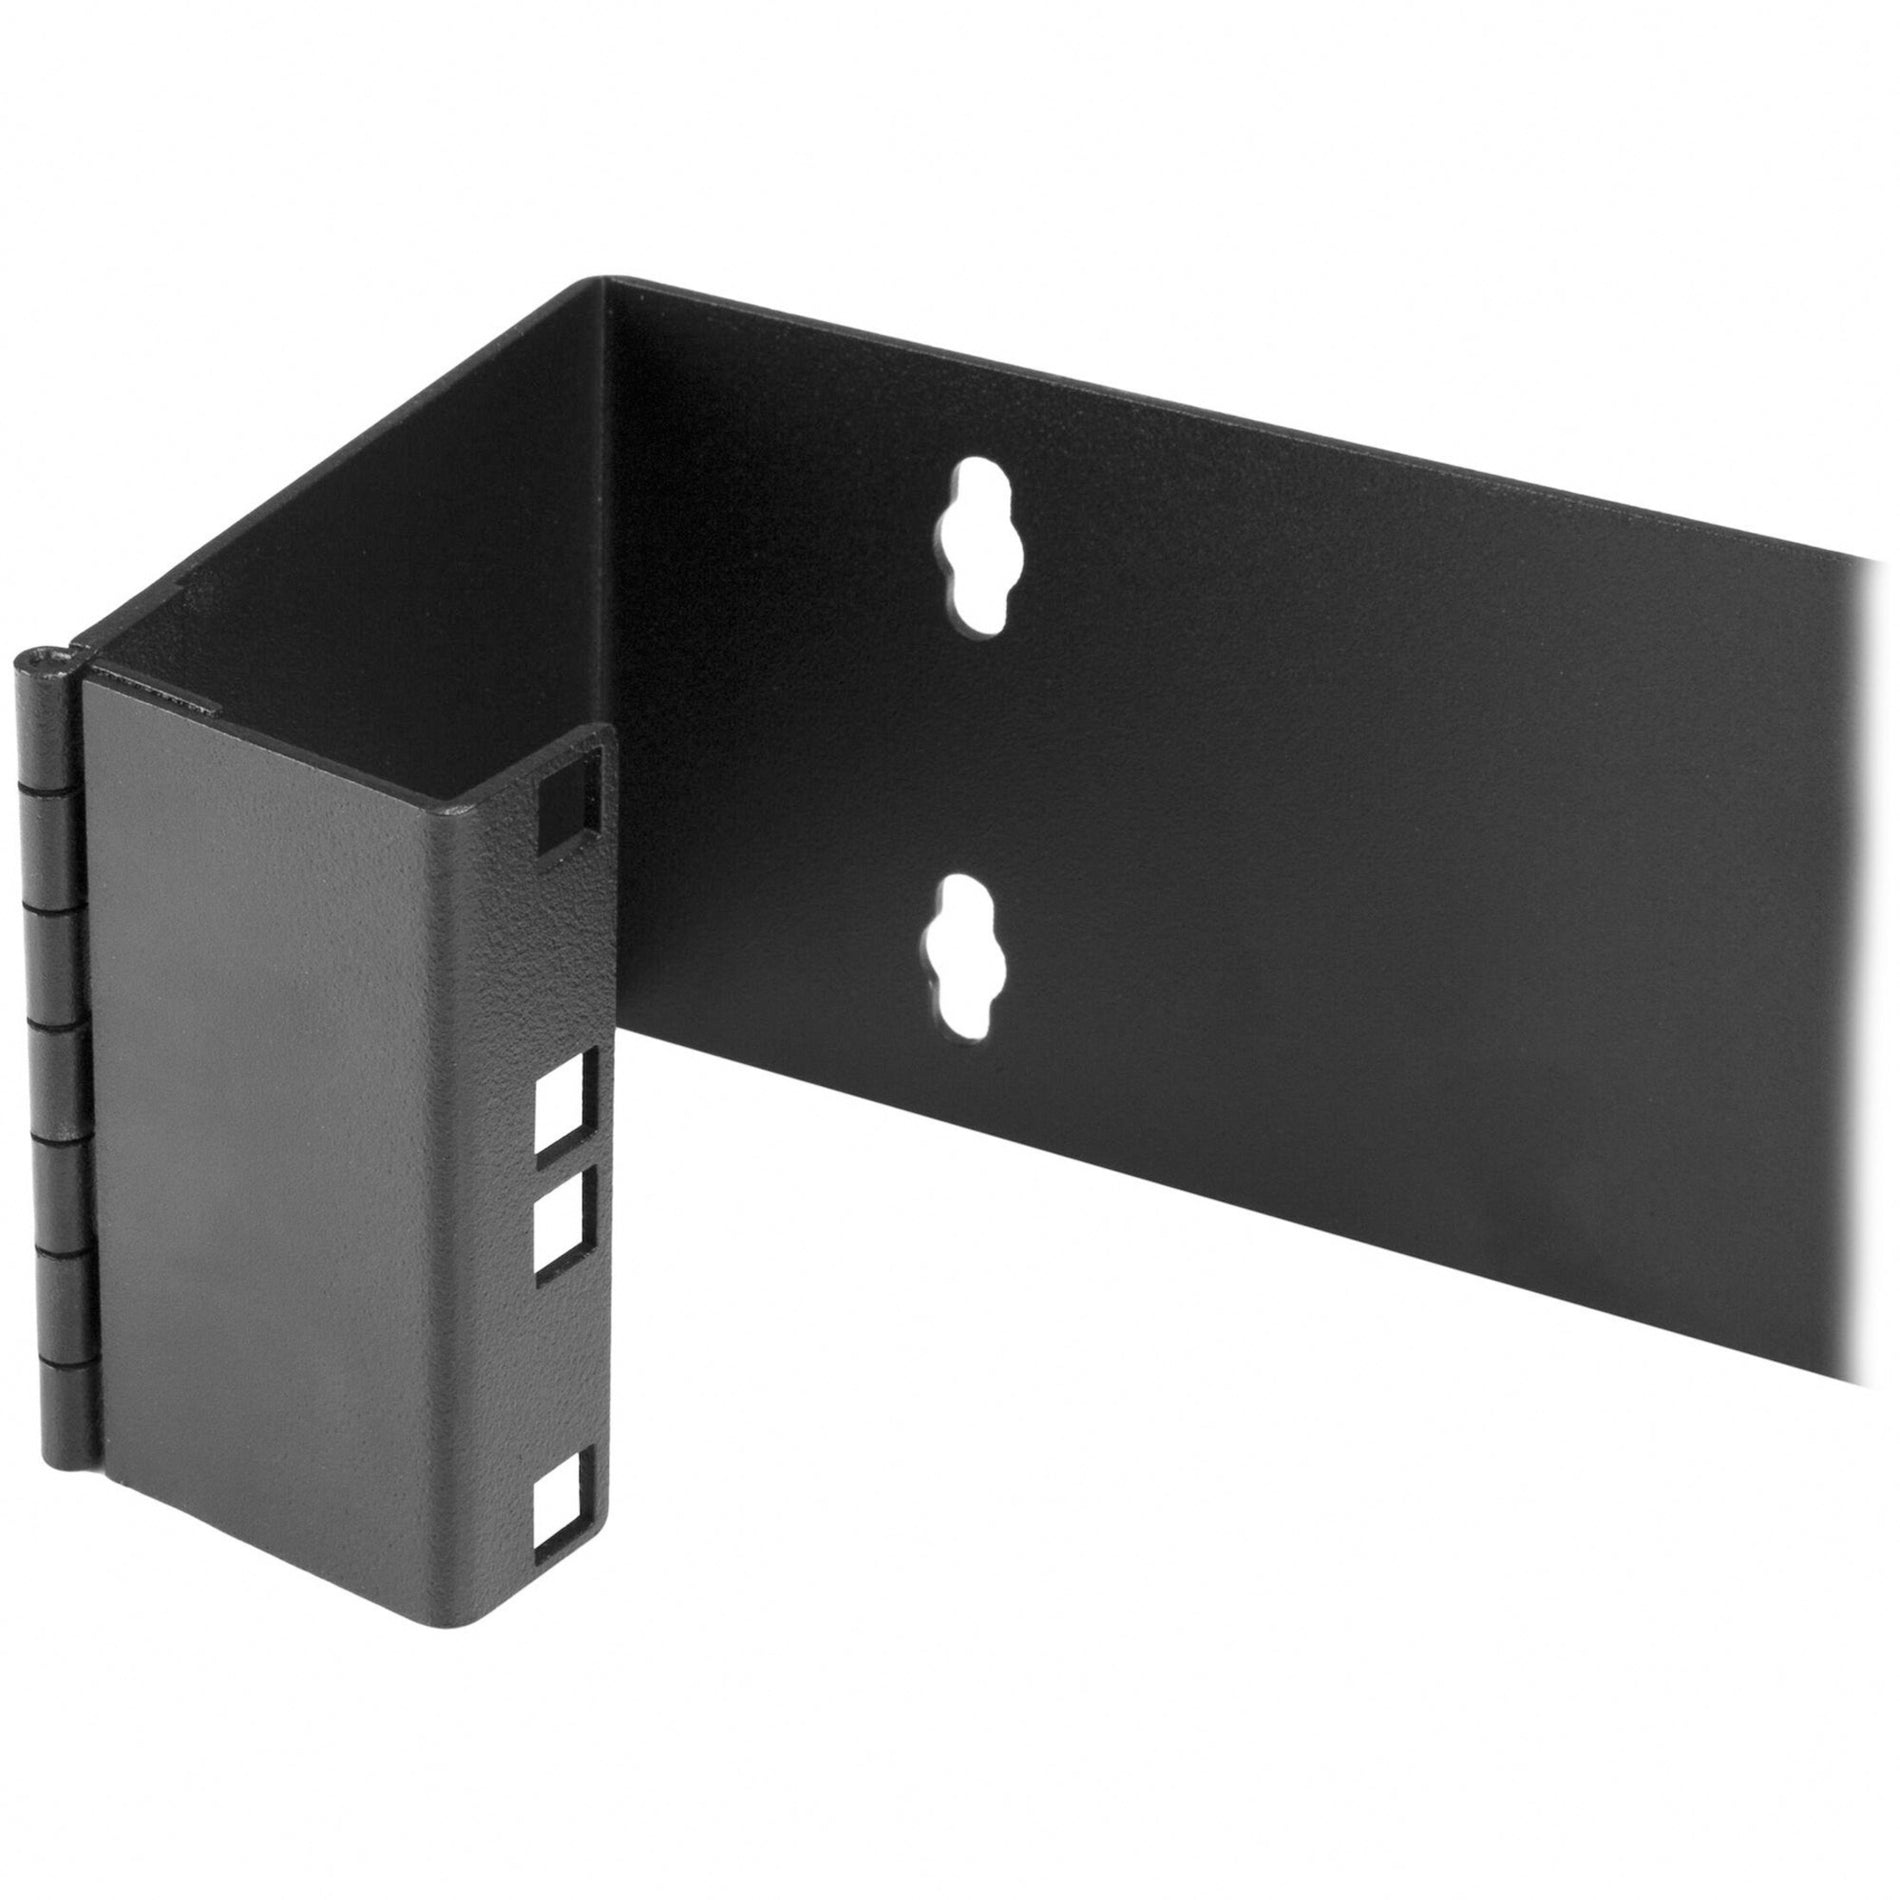 StarTech.com WALLMOUNTH2 2U 19in Hinged Wall Mount Bracket for Patch Panels, Easy Rack Equipment Installation